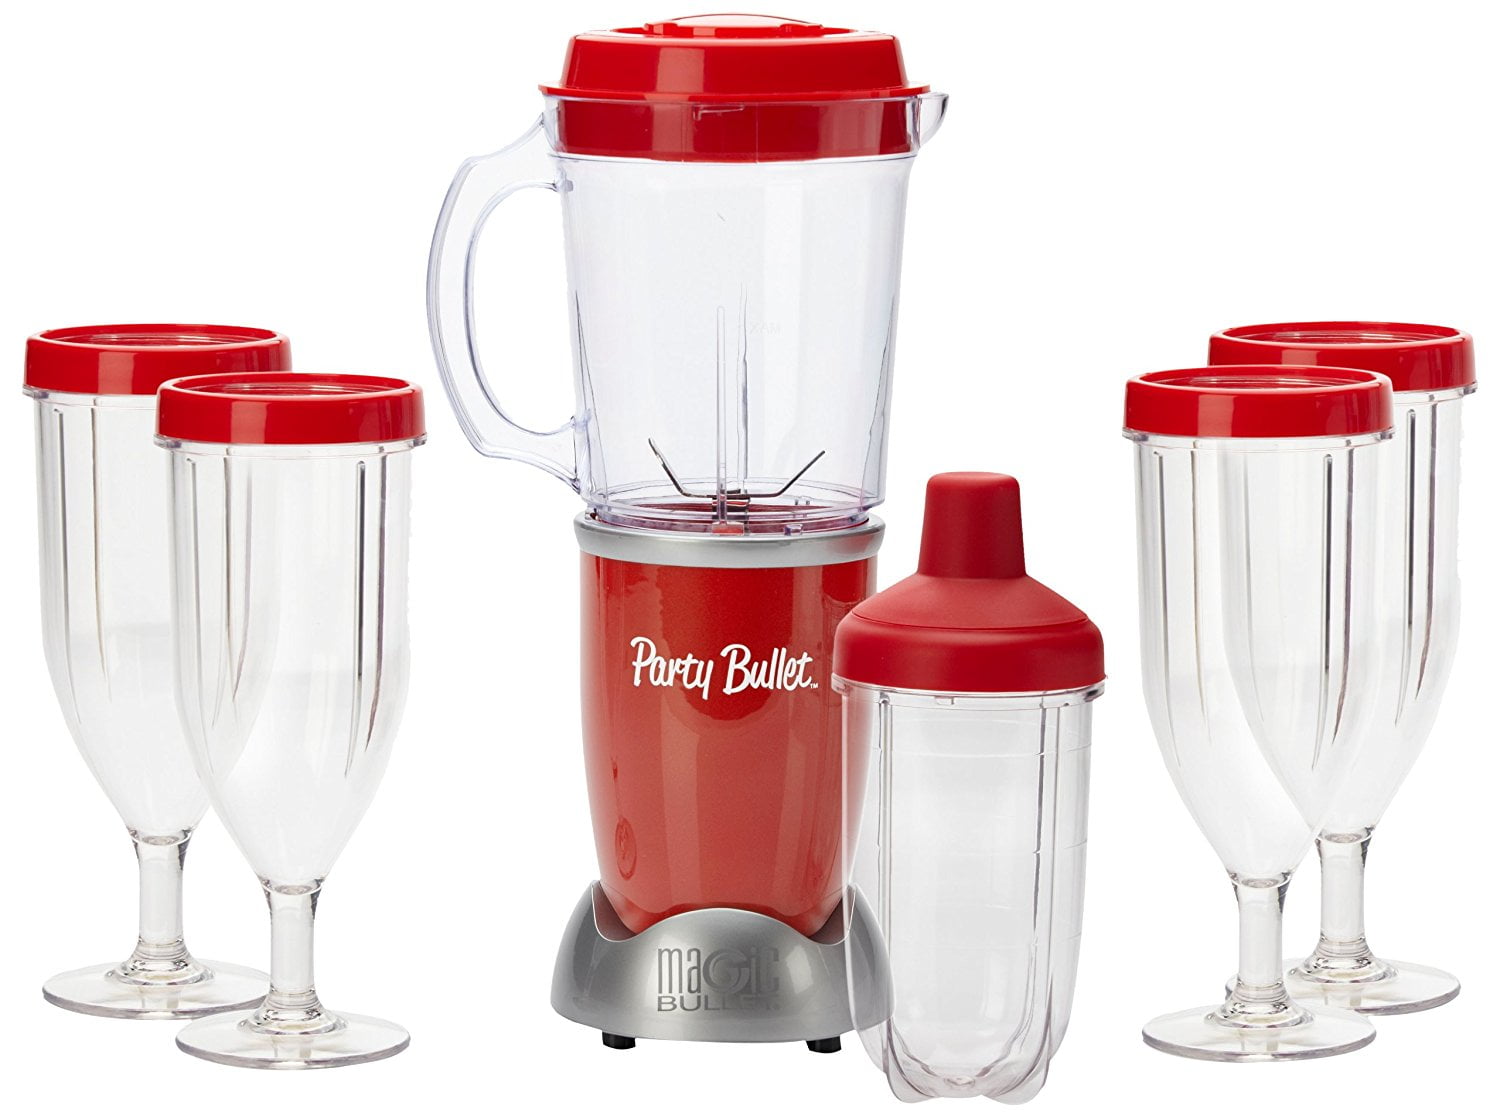 Recipe Book NIB Party Bullet by Magic Bullet  18pc Drink Making System